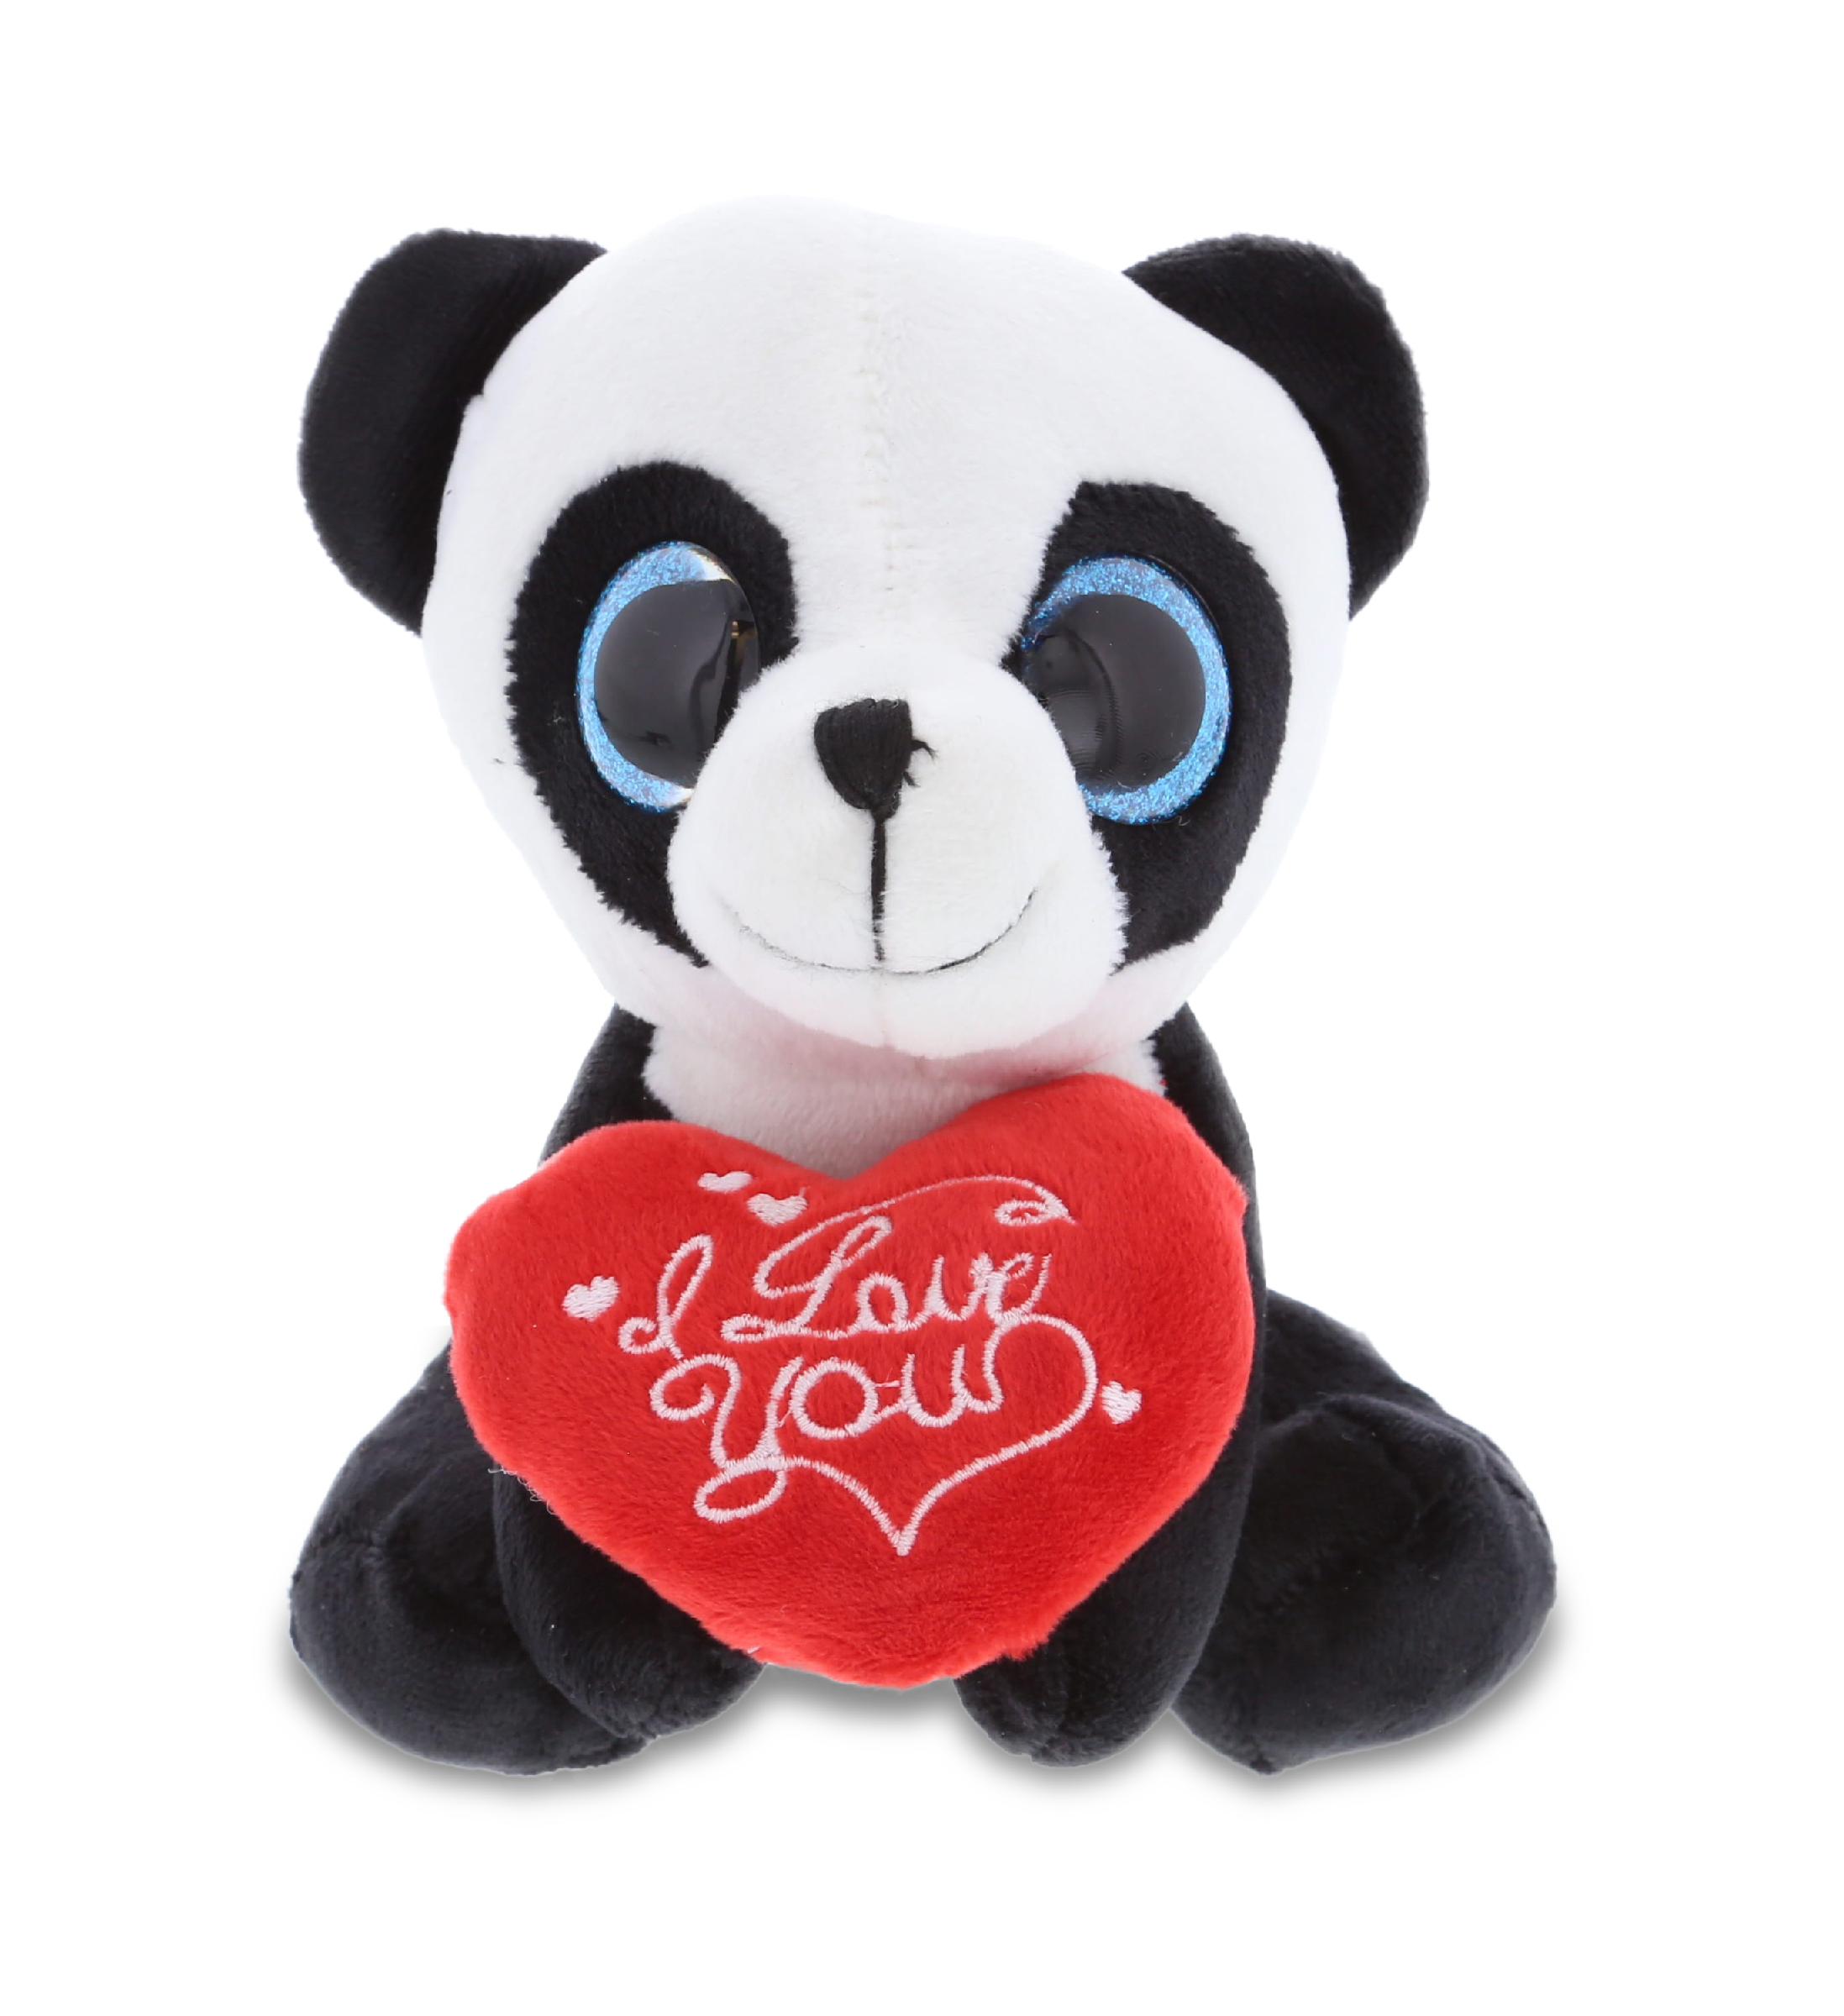 LARGE ENORMOUS TEDDY STUFFED CUDDLY PLUSH SOFT TOY PANDA & FREE GIFT VALENTINES 